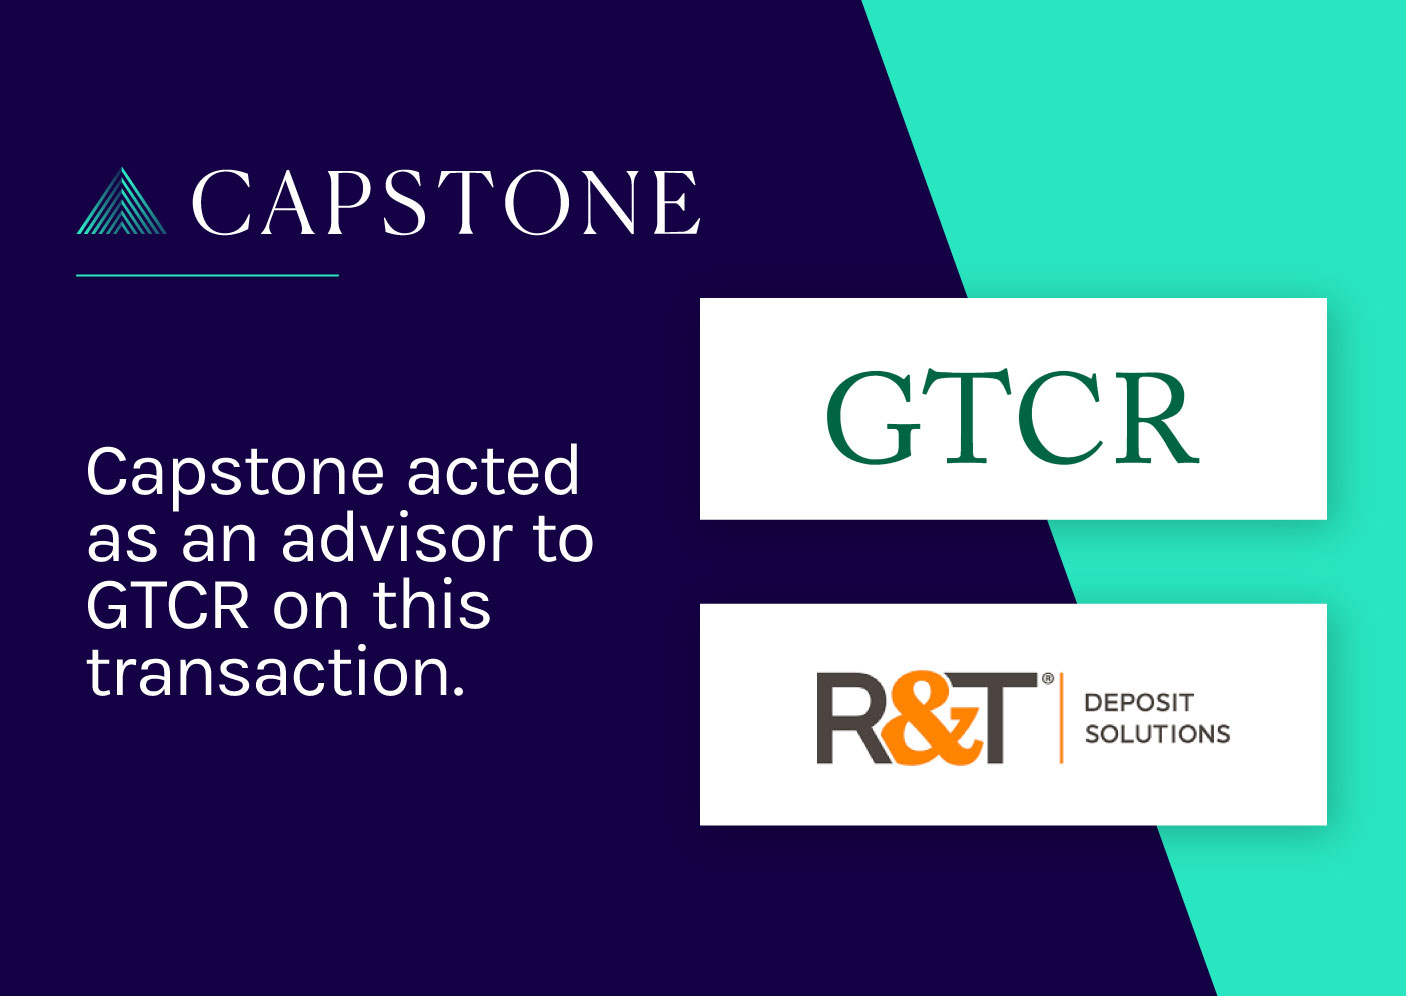 GTCR Invests in R&T Deposit Solutions